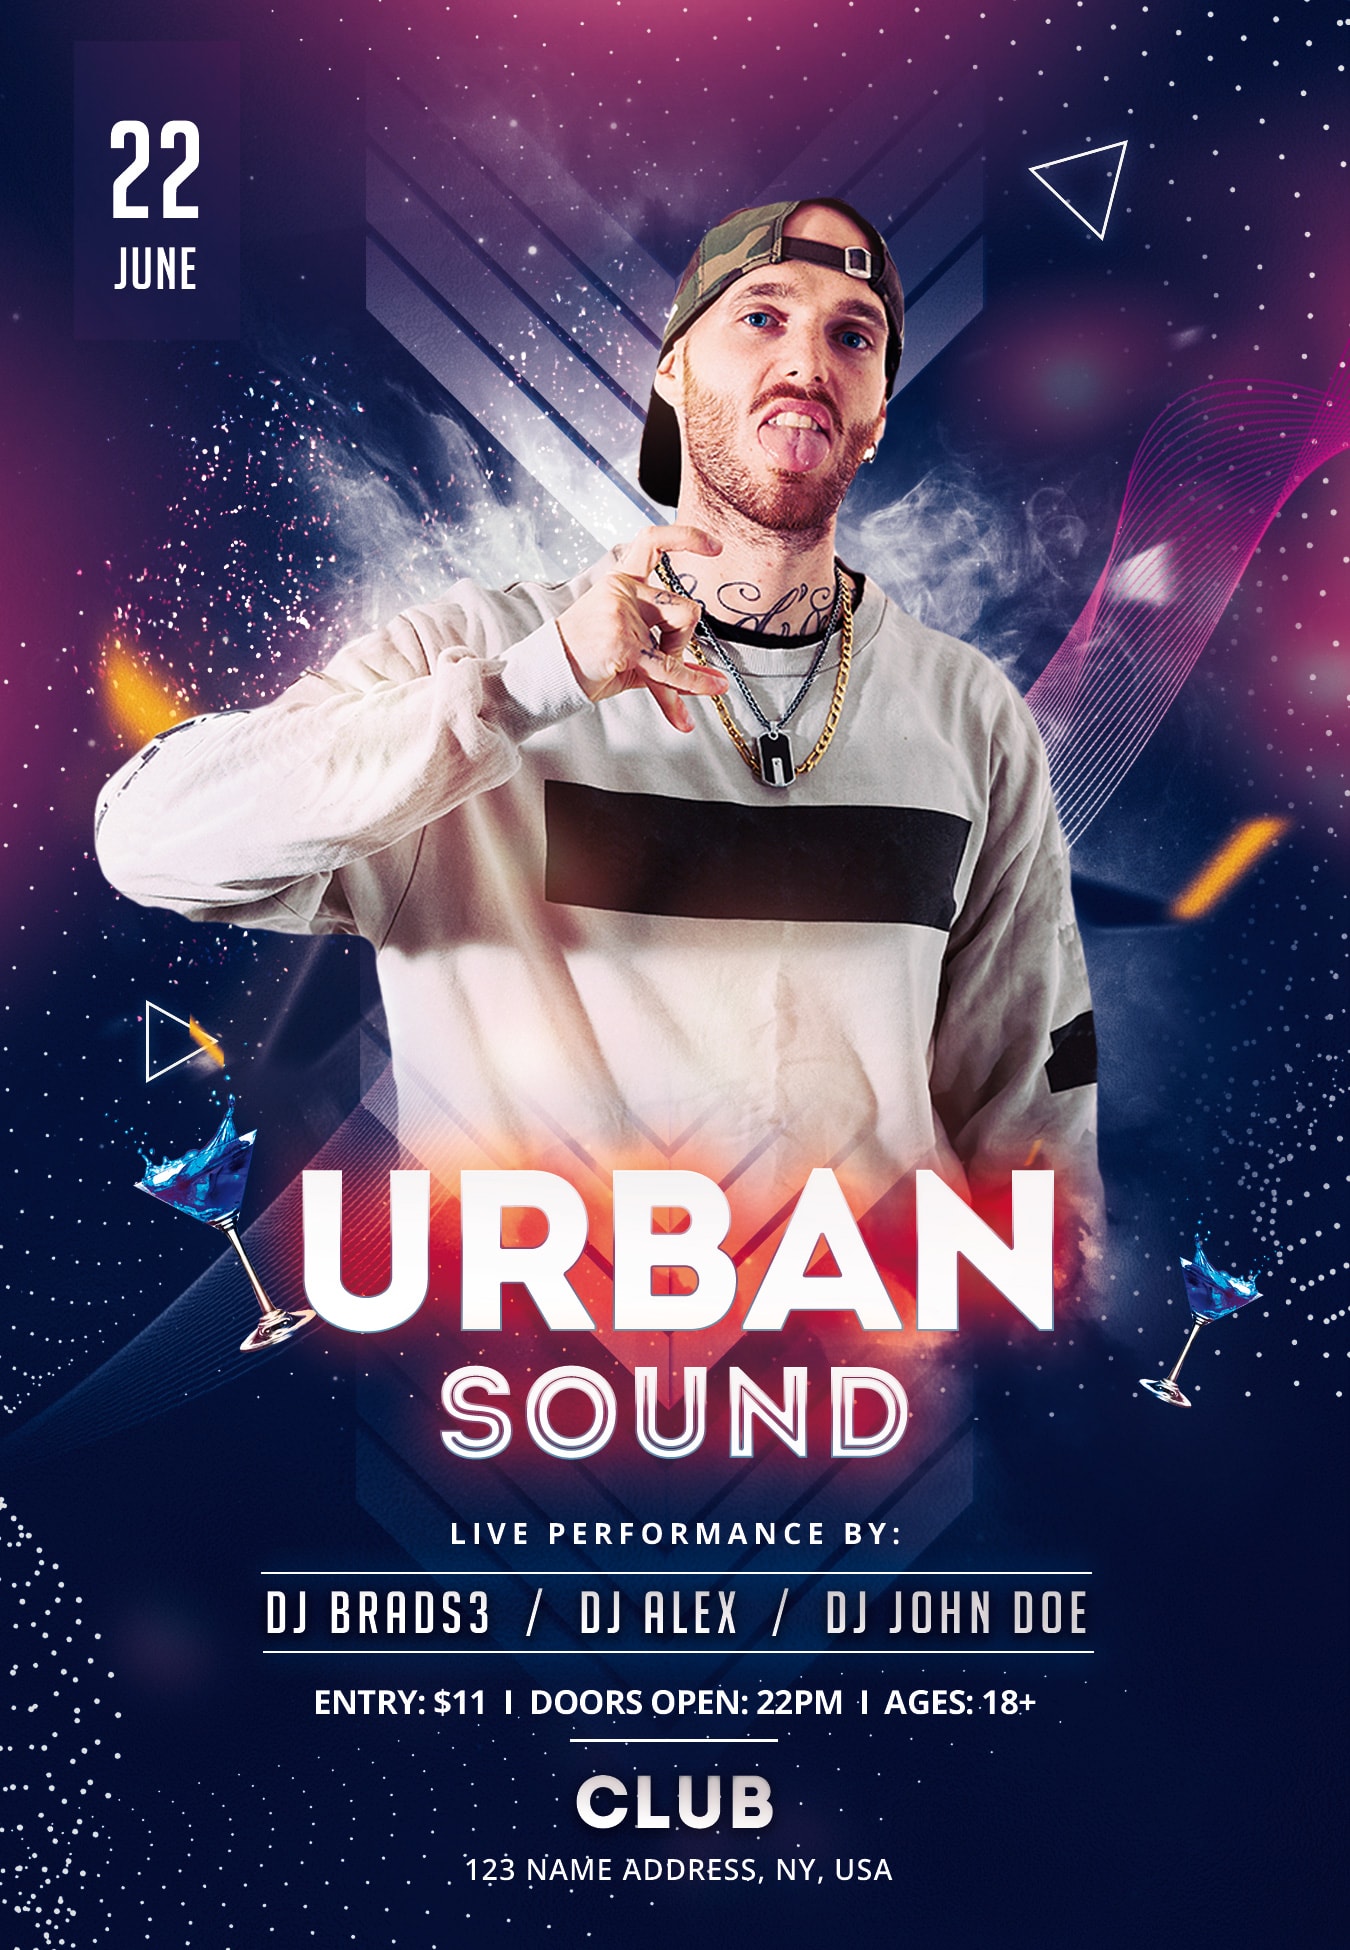 Urban Sound - Download Free PSD Flyer Template